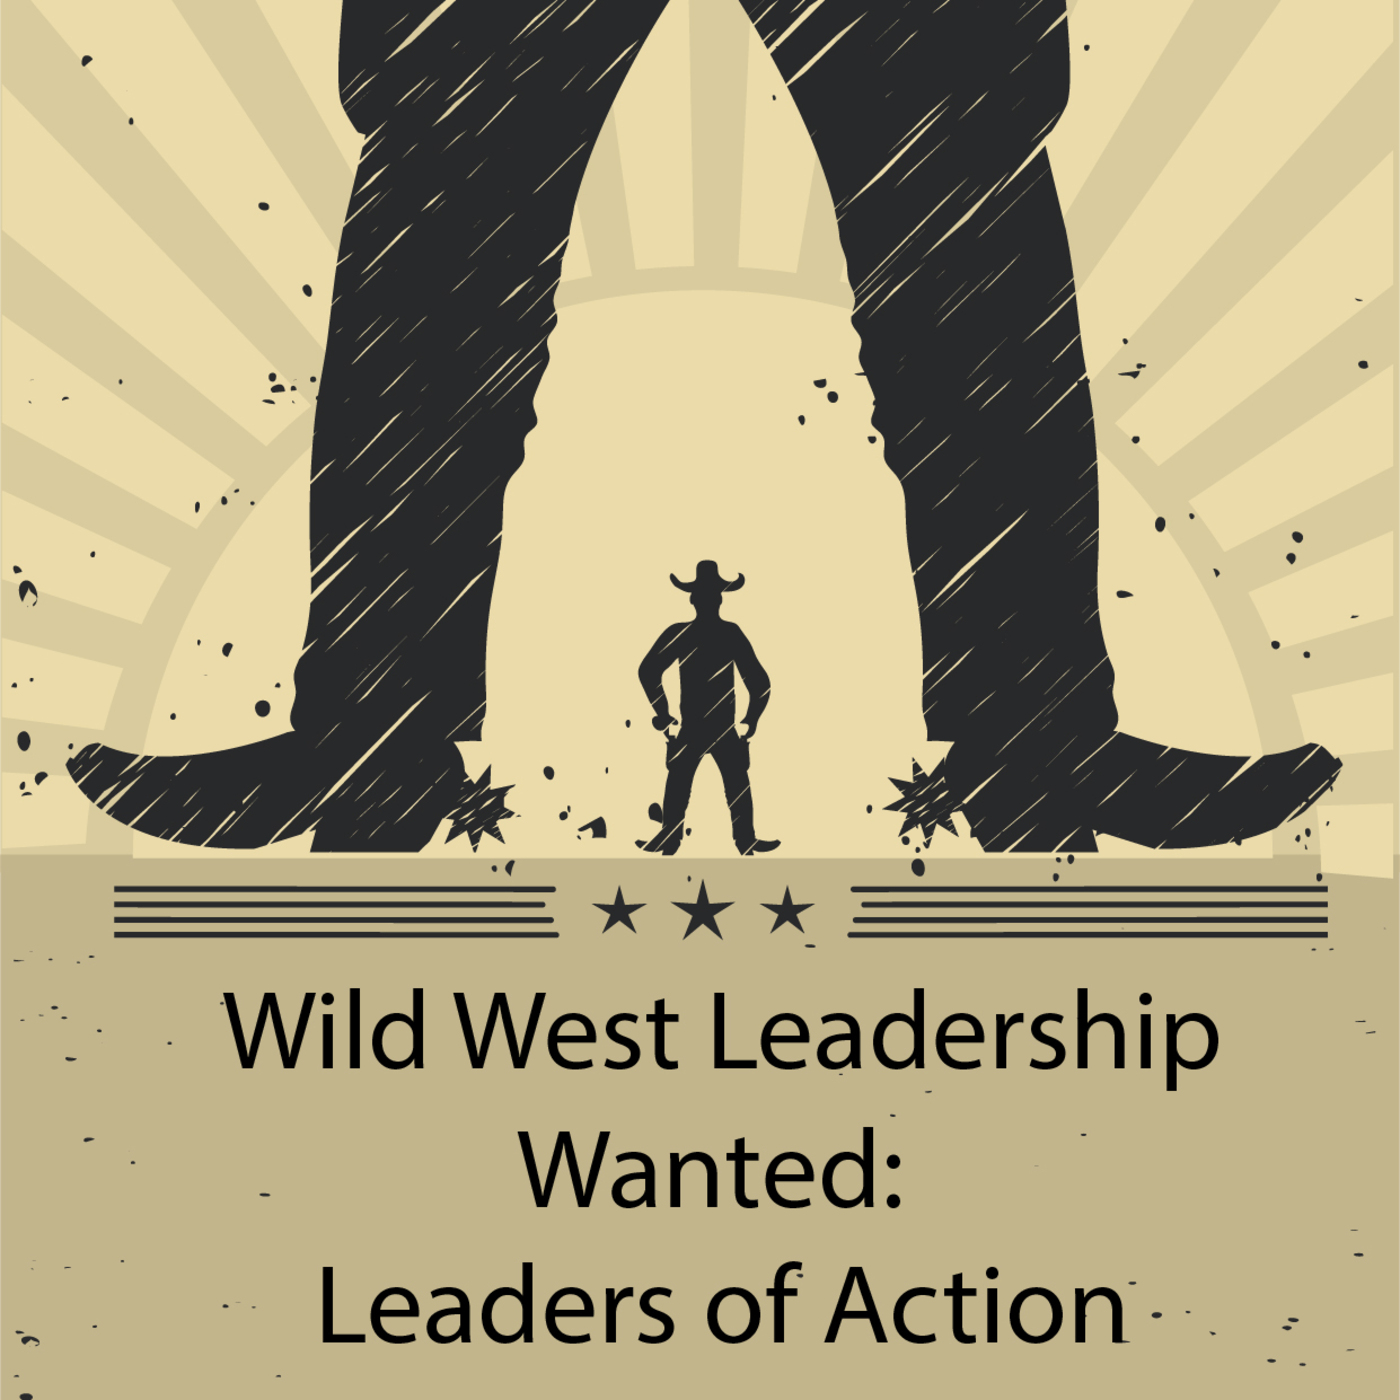 Wild West Leadership - Wanted: Leaders of Action